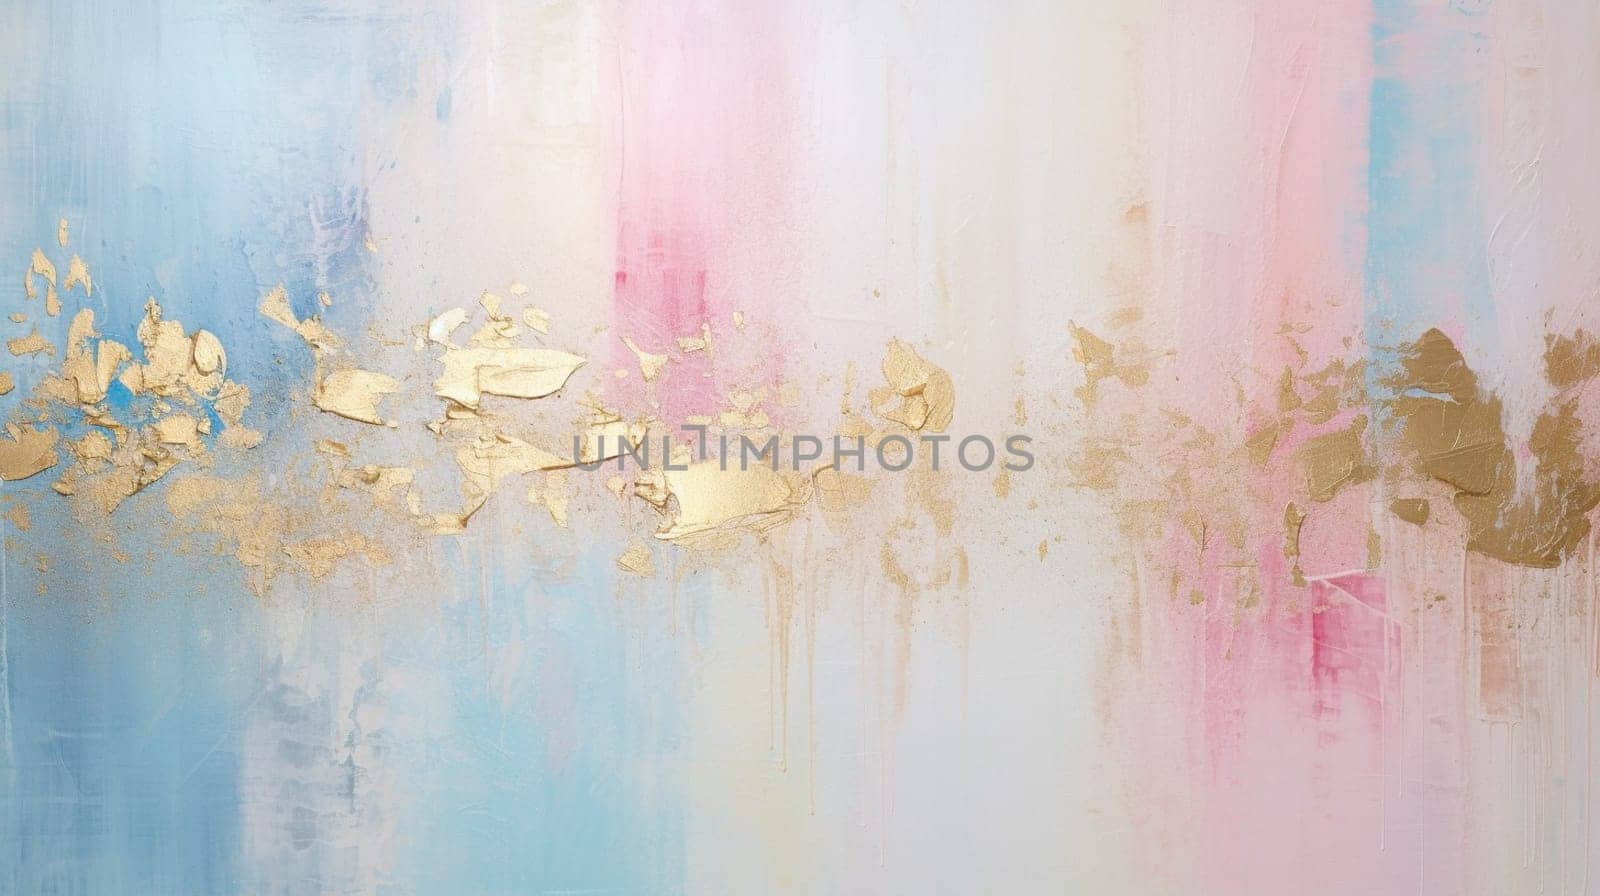 A detailed view of a painting featuring shades of pink, blue, and gold on a white background, showcasing intricate patterns and vibrant tints in watercolor paint